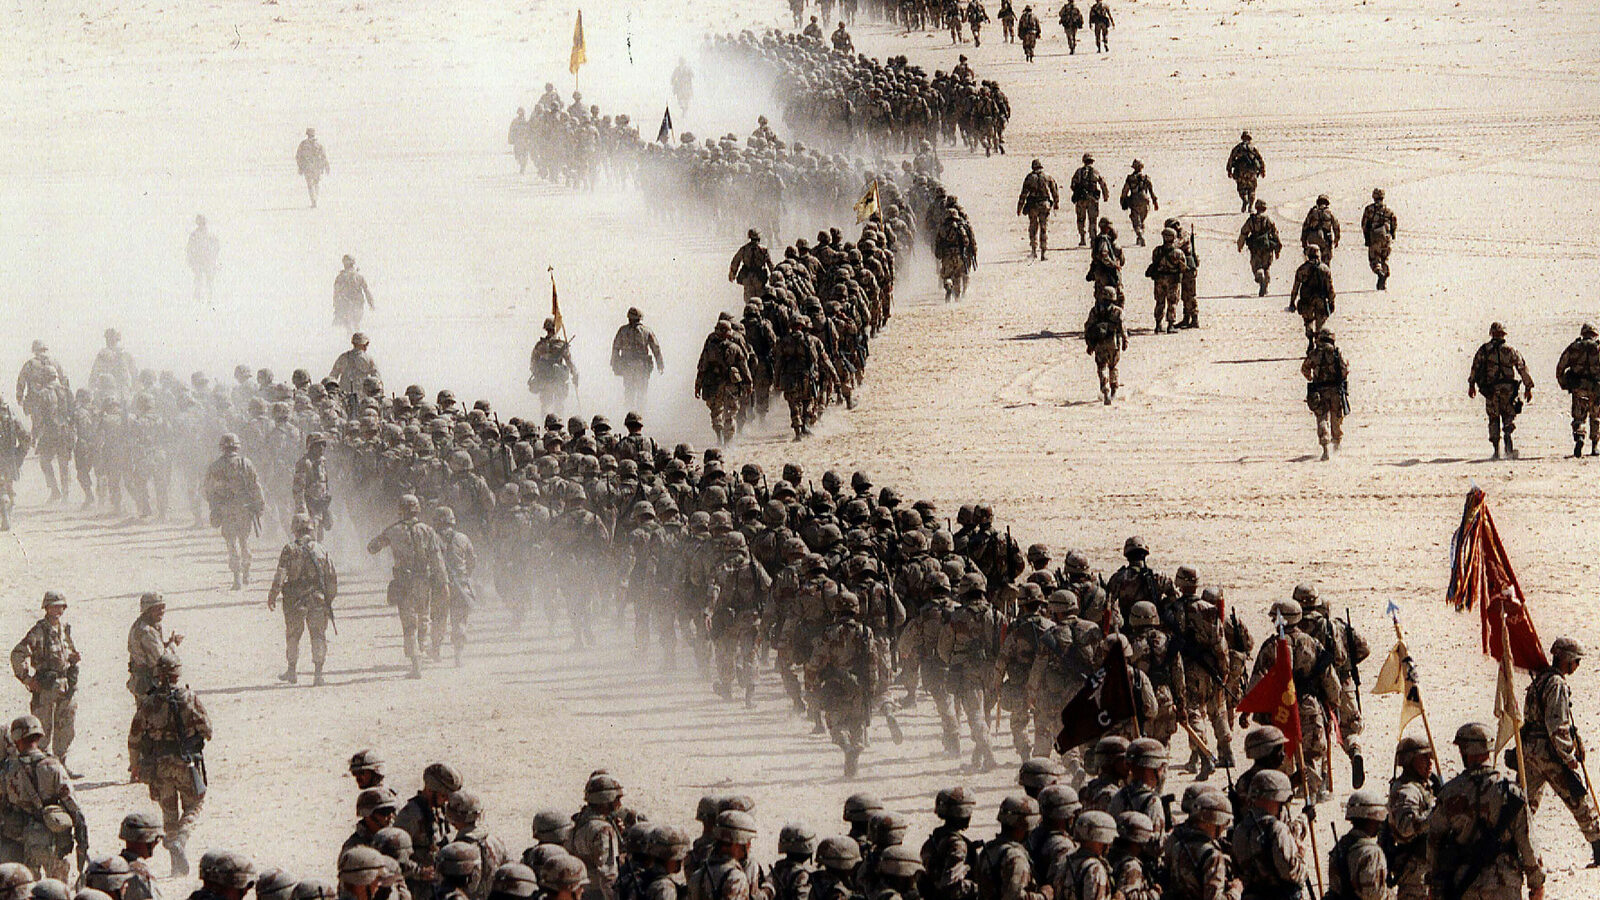 The U.S. 1st Cavalry Division deploy across the Saudi desert on during preparations prior to the Gulf War, 1990. (AP Photo/Greg English)